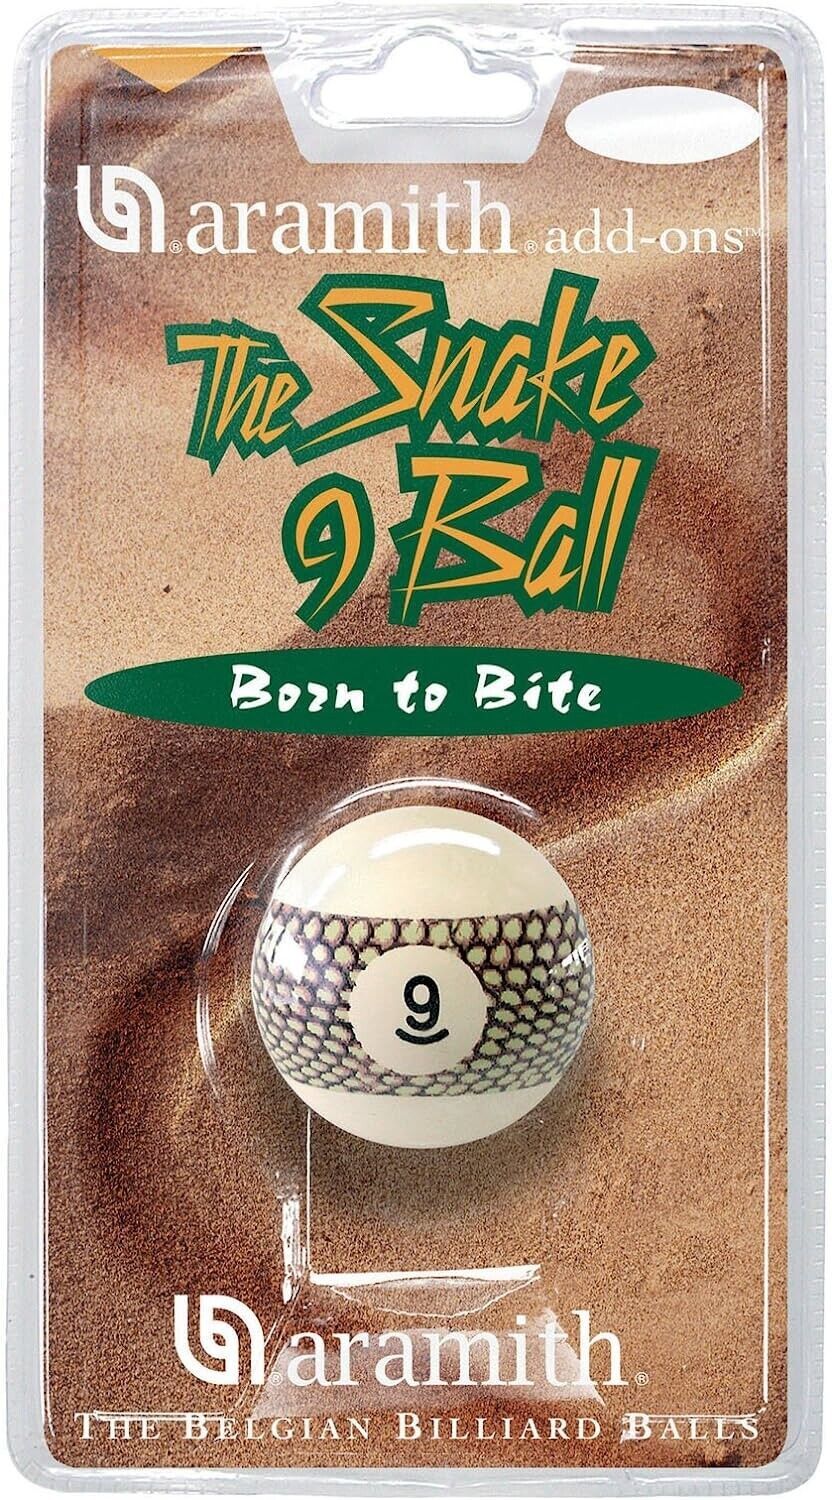 New Aramith 2.25" Novelty Snakeskin Snake Replacement 9 BALL - 2 1/4 INCH - $16.95